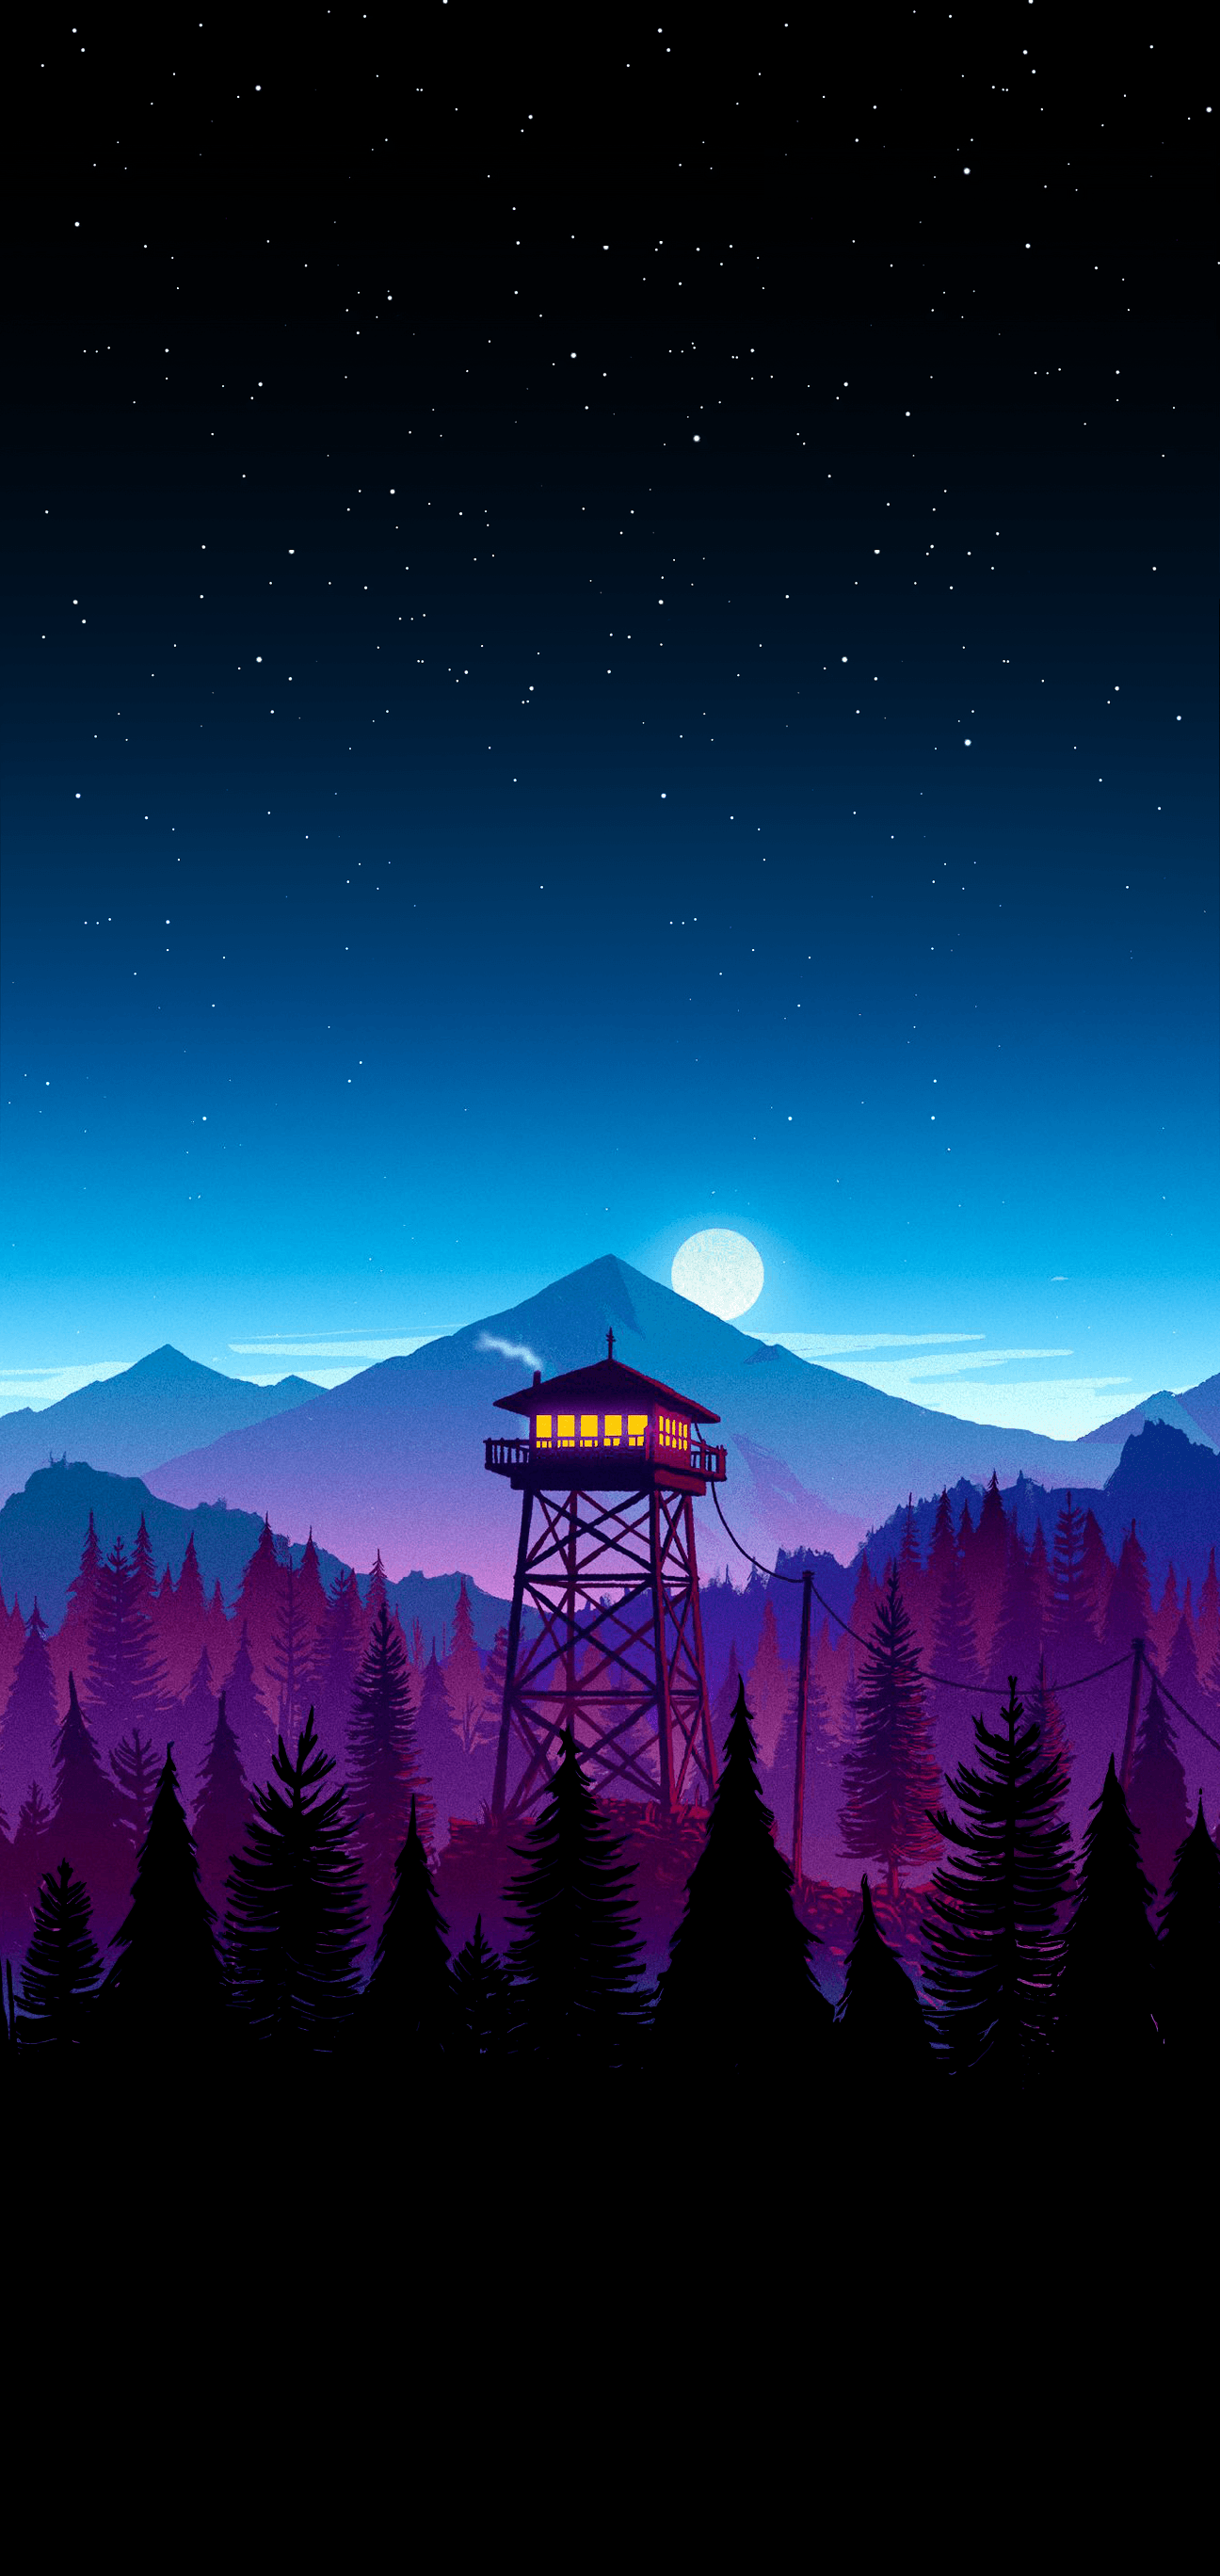 Firewatch wallpaper I made for my iPhone X. Minimalist